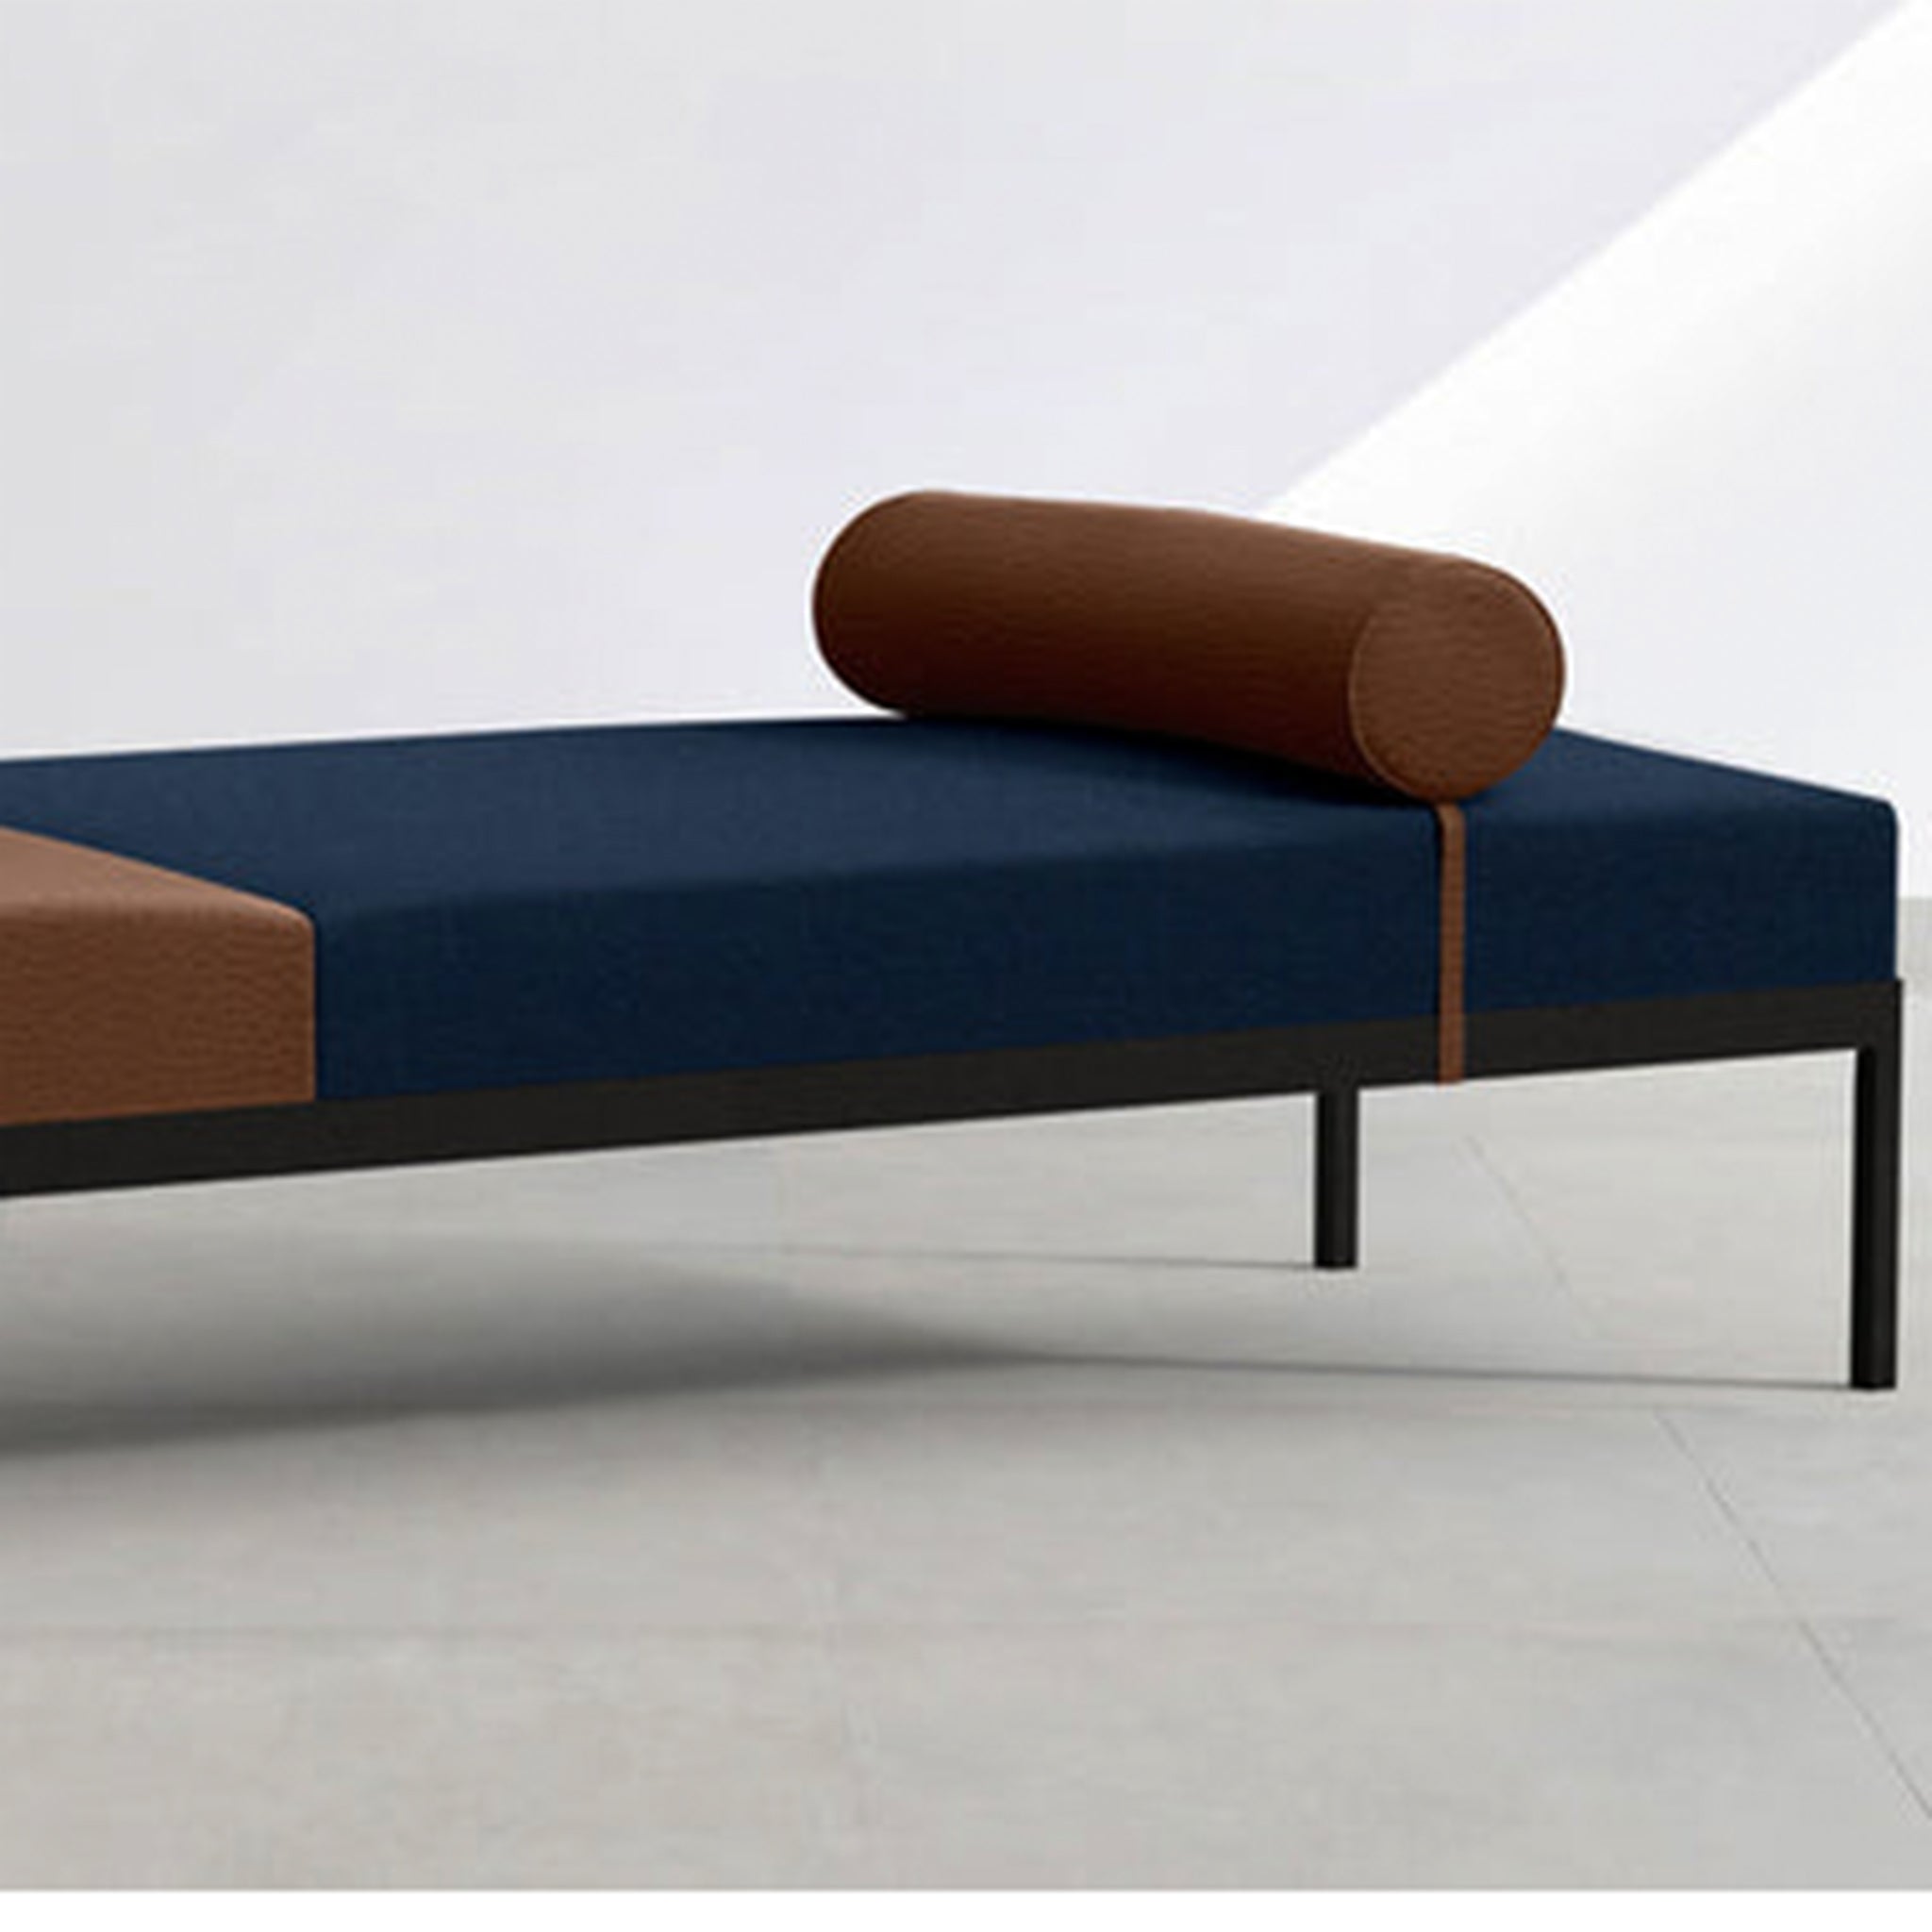 Stylish Rodman Day Bed with a low seating design.